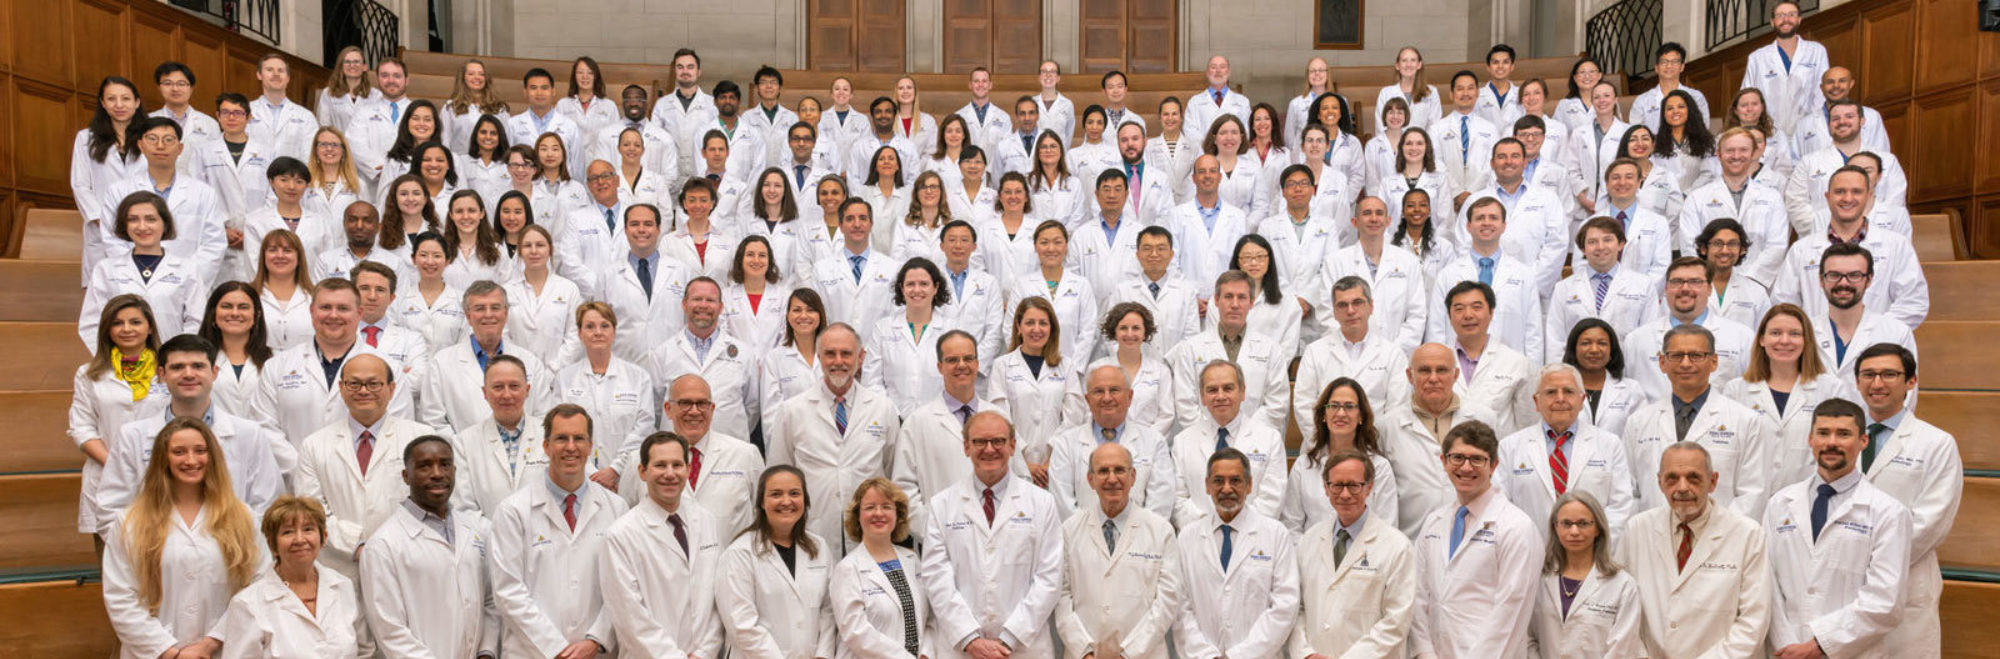 Pathology Faculty  Group Pic - 2019